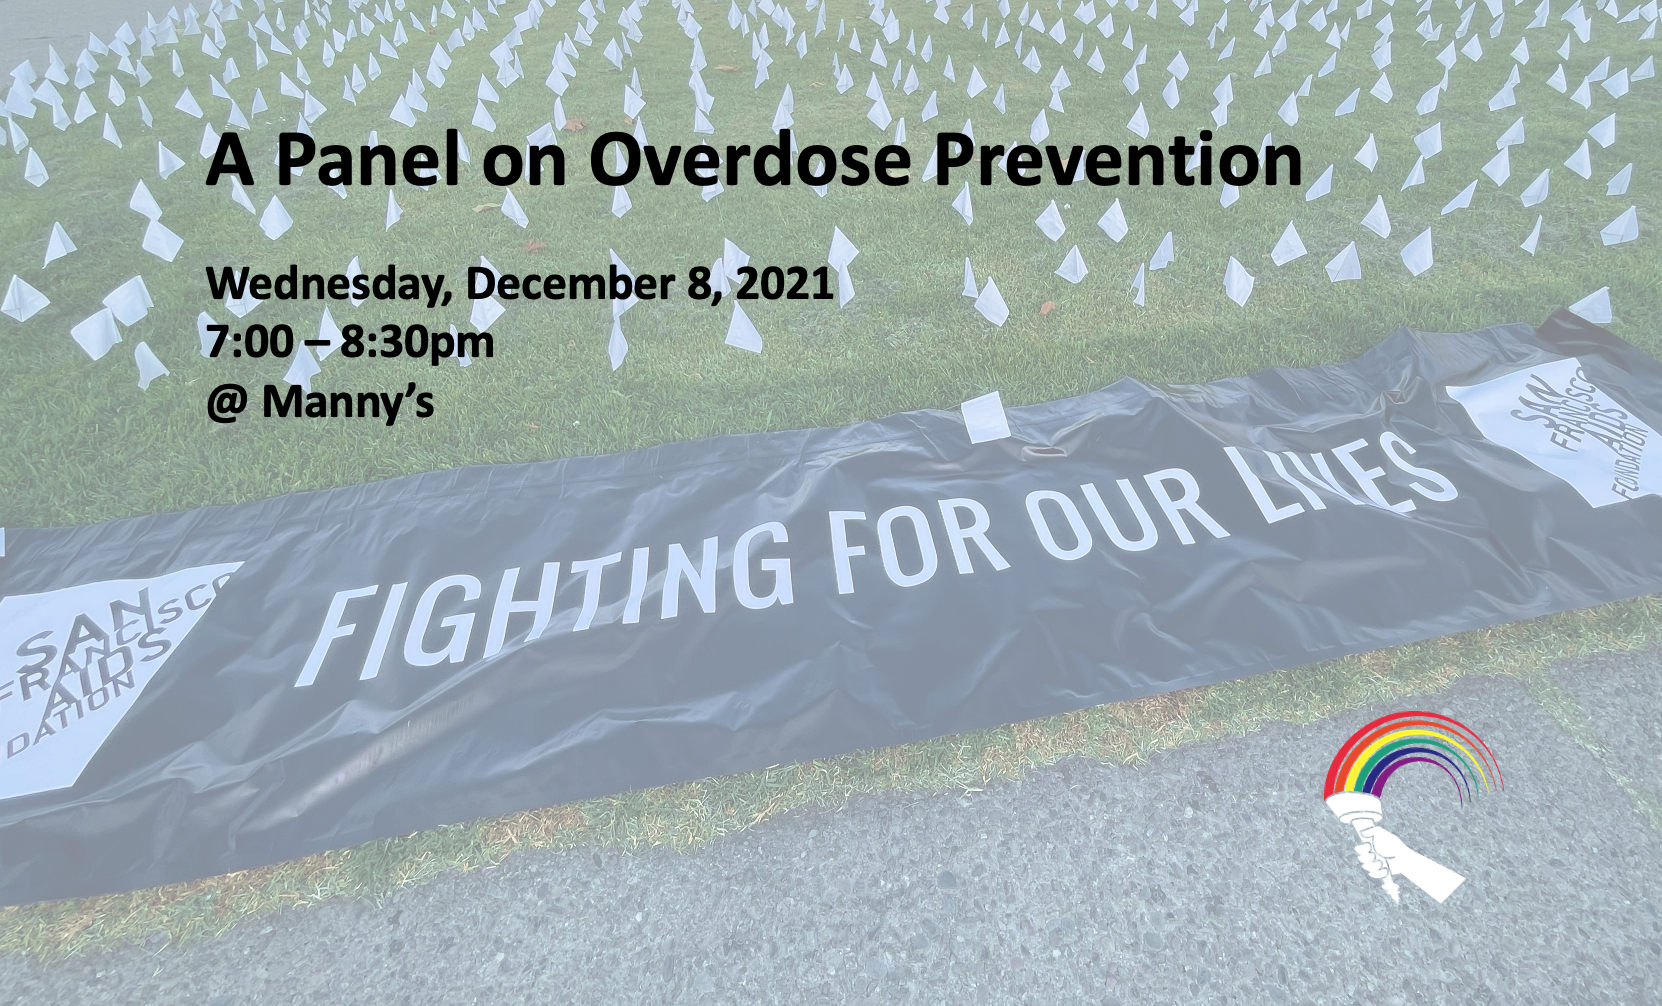 Alice Club:  A Panel on Overdose Prevention @ Manny's